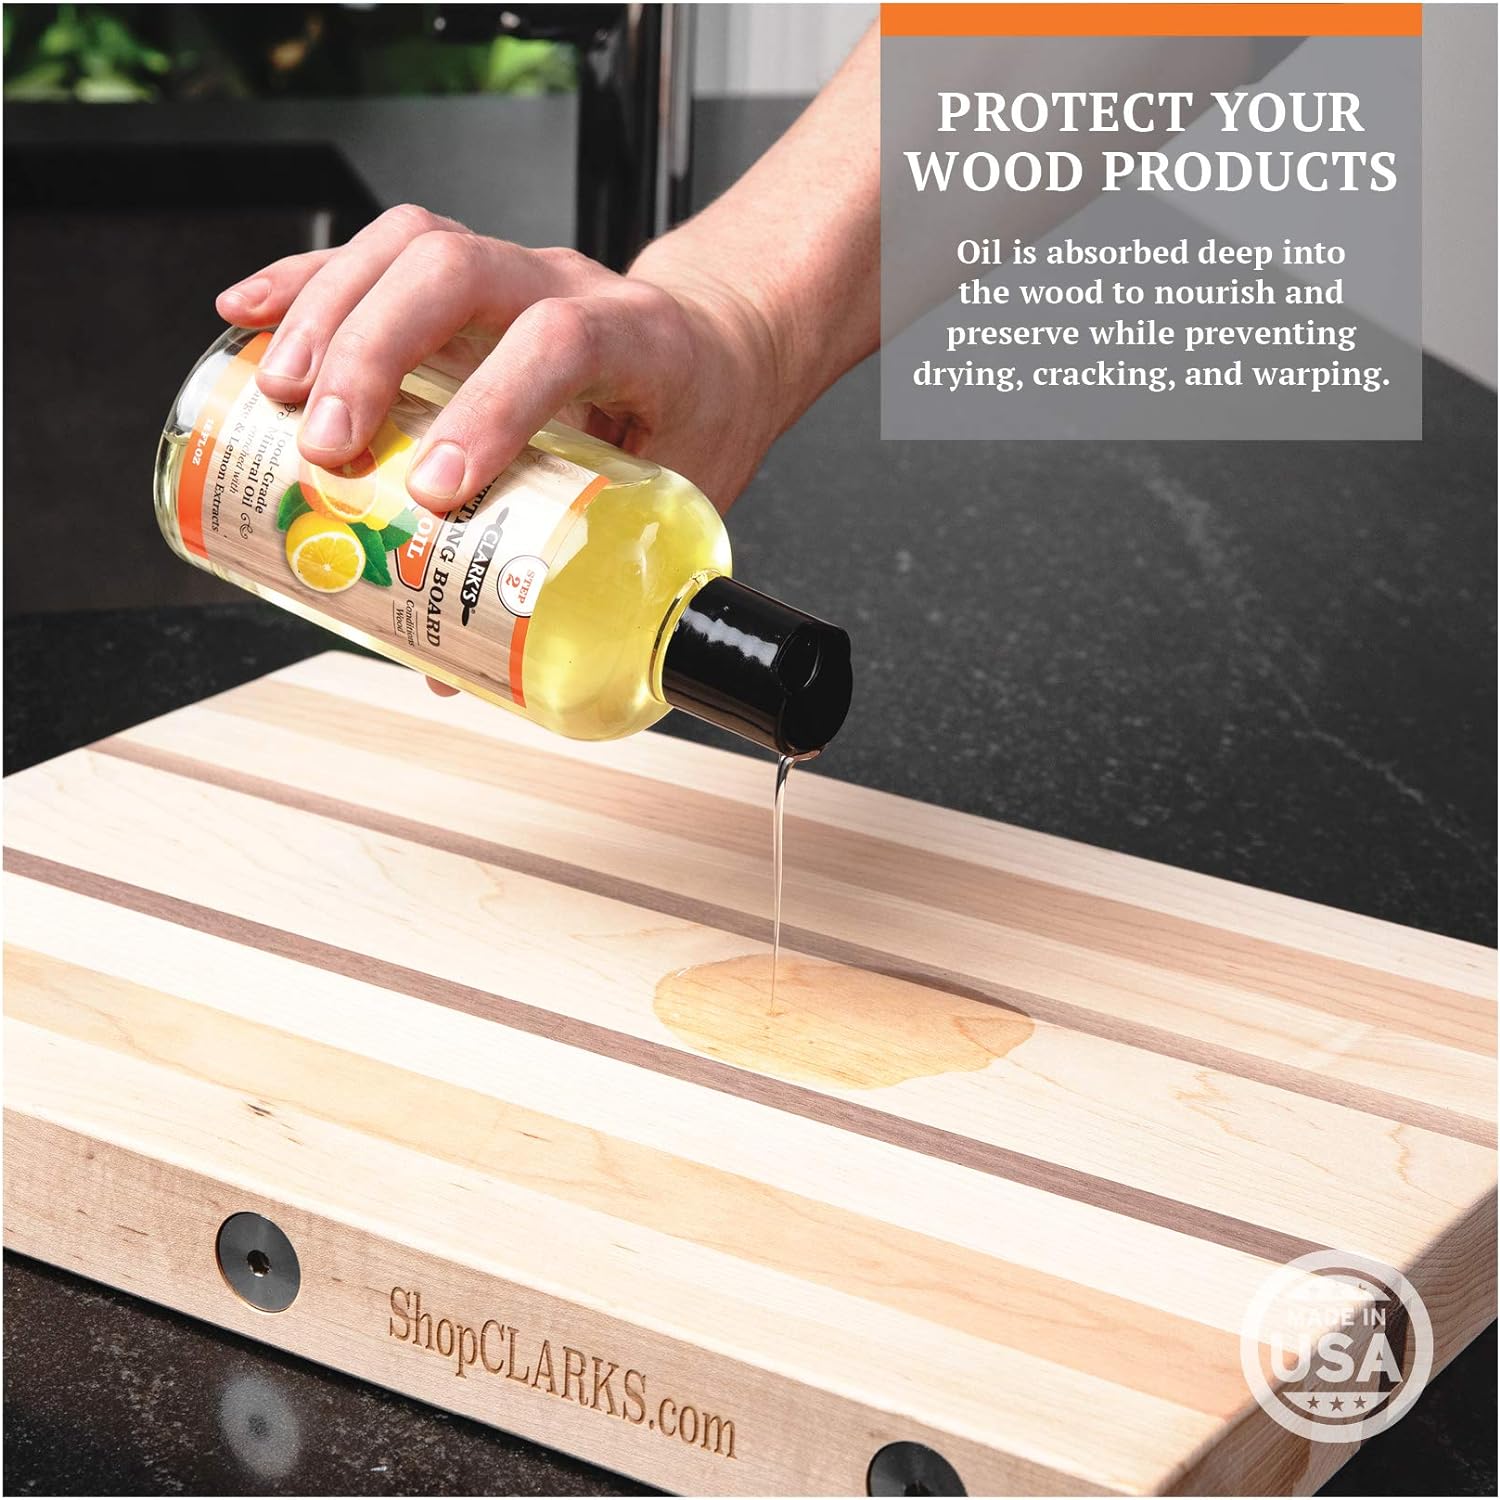 CLARK’S Cutting Board Oil and Wax Kit – Includes Food Grade Mineral Oil (12oz), Finishing Wax (6oz), Applicator, & Buffing Pad to Clean and Protect Wood, Enriched with Natural Lemon & Orange Extract : Health & Household